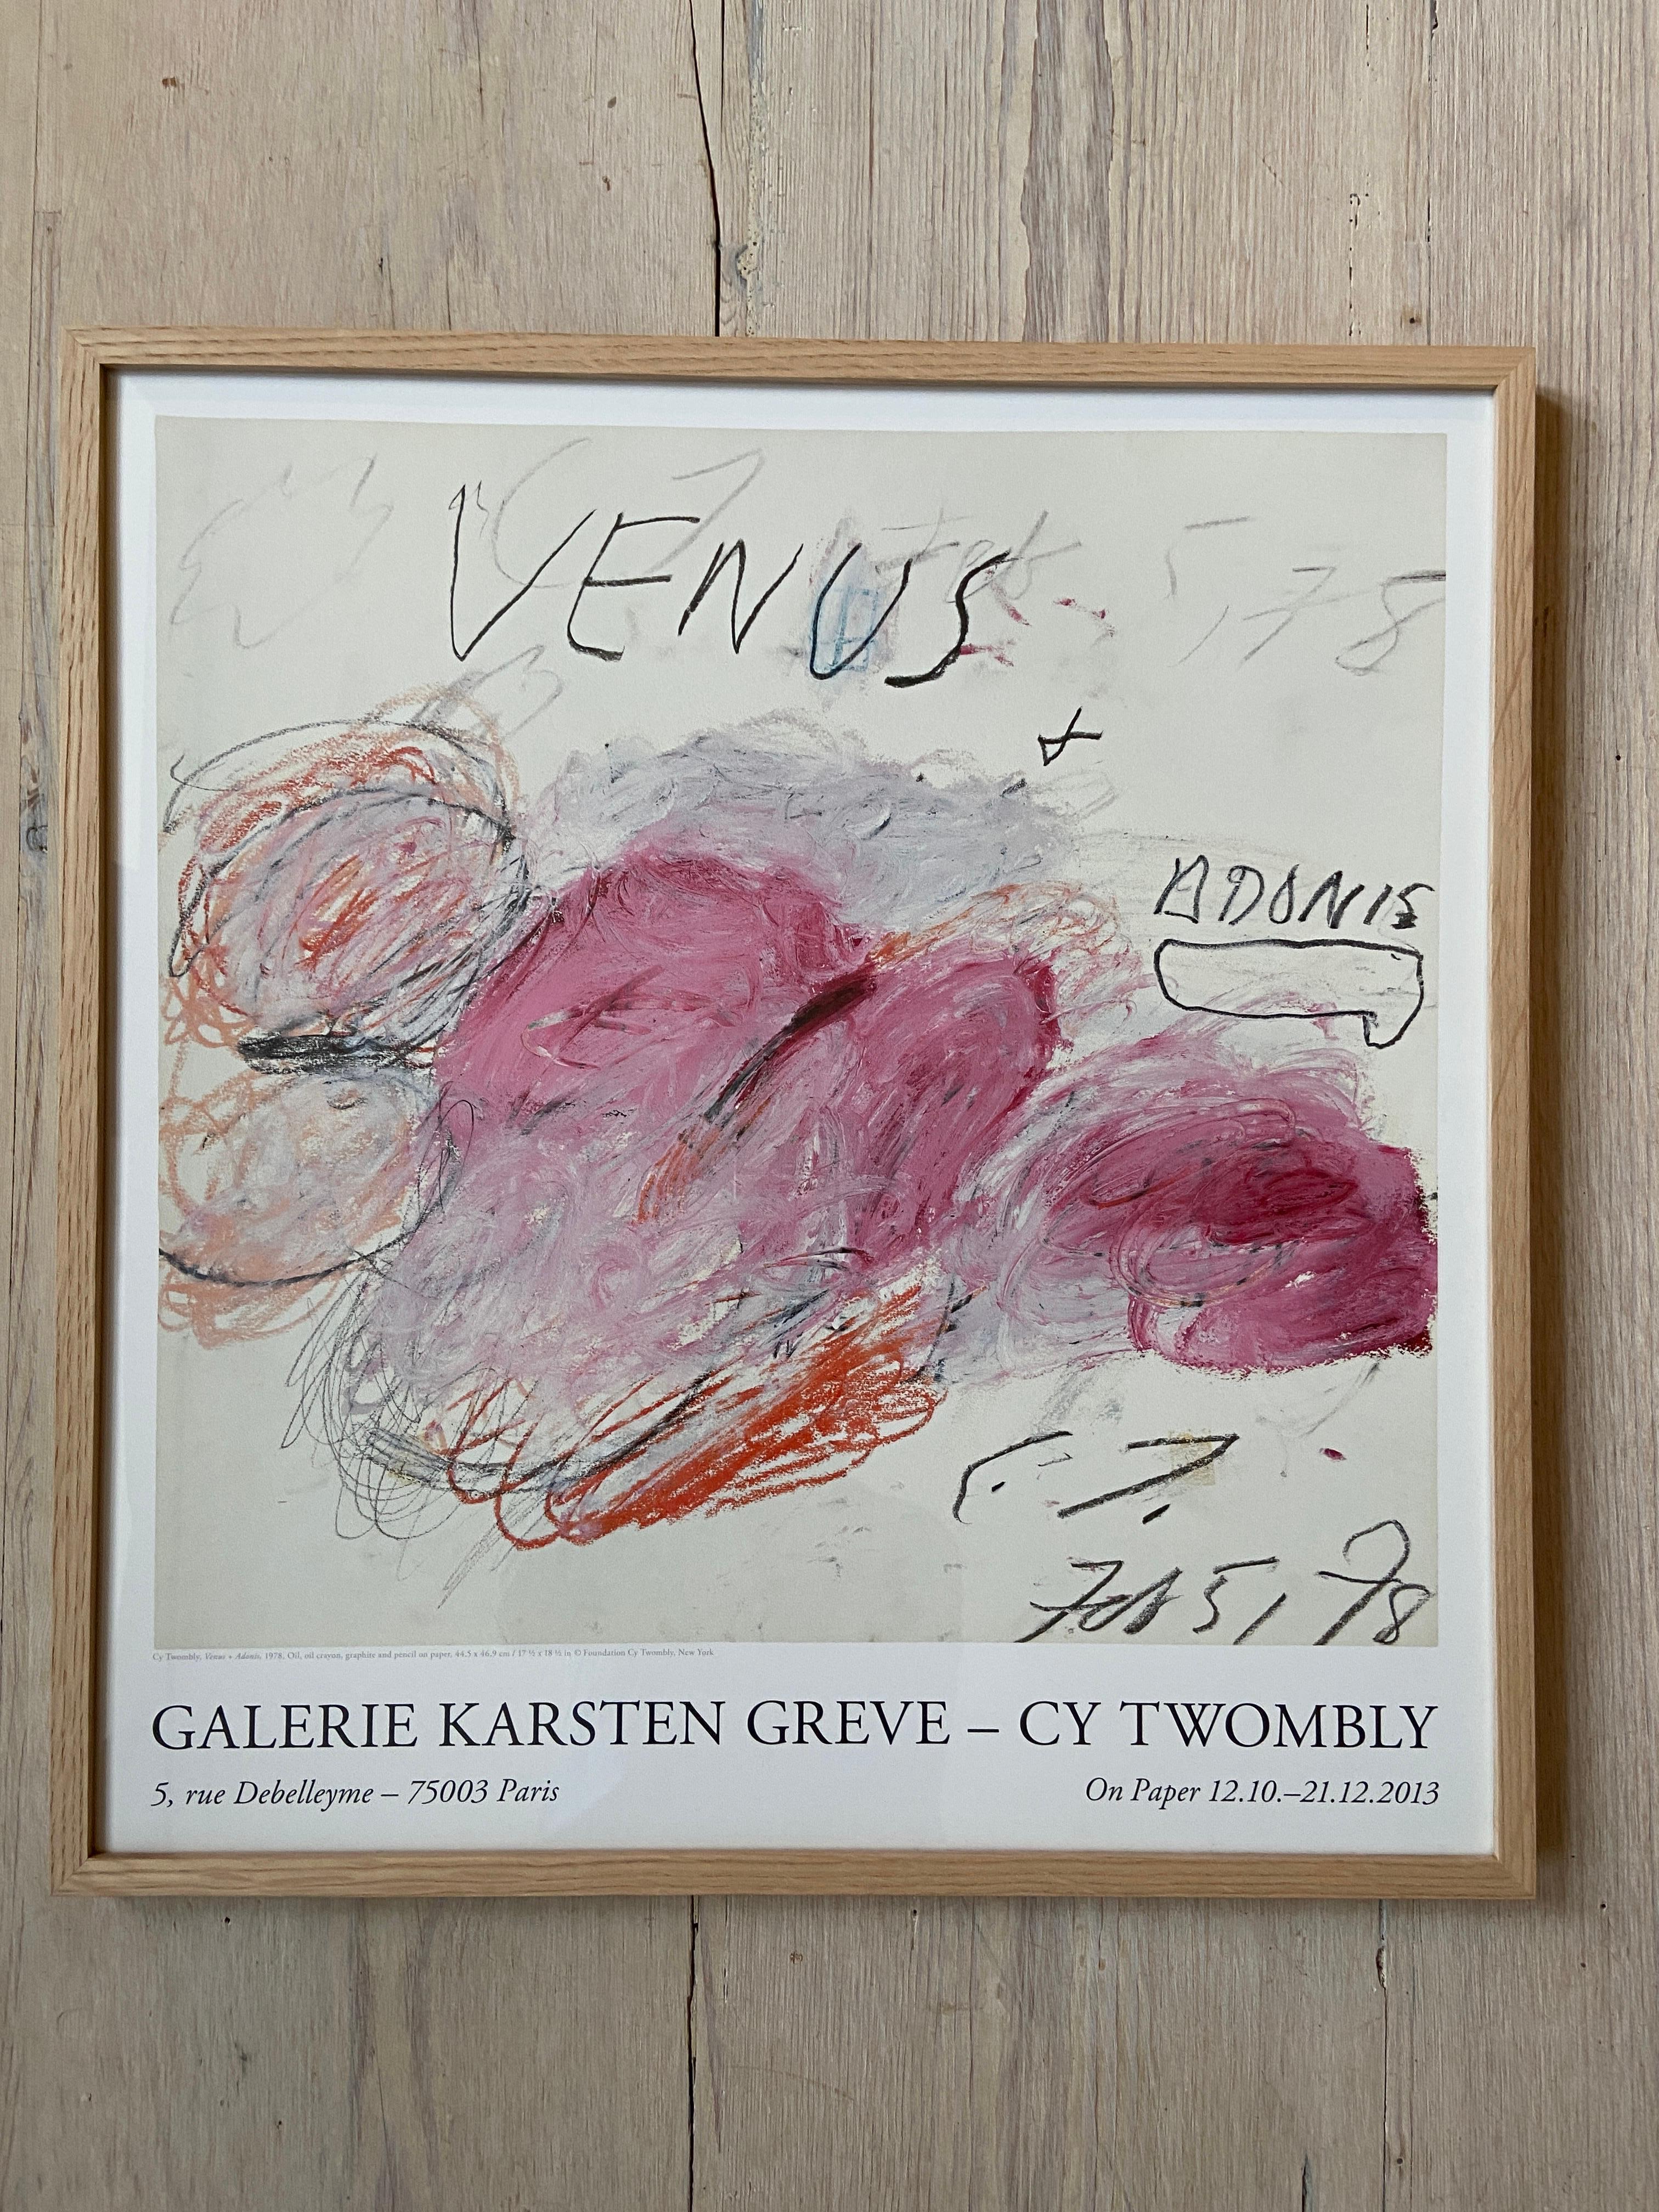 French Cy Twombly Galerie Karsten Greve Exhibition Poster, France, 2013